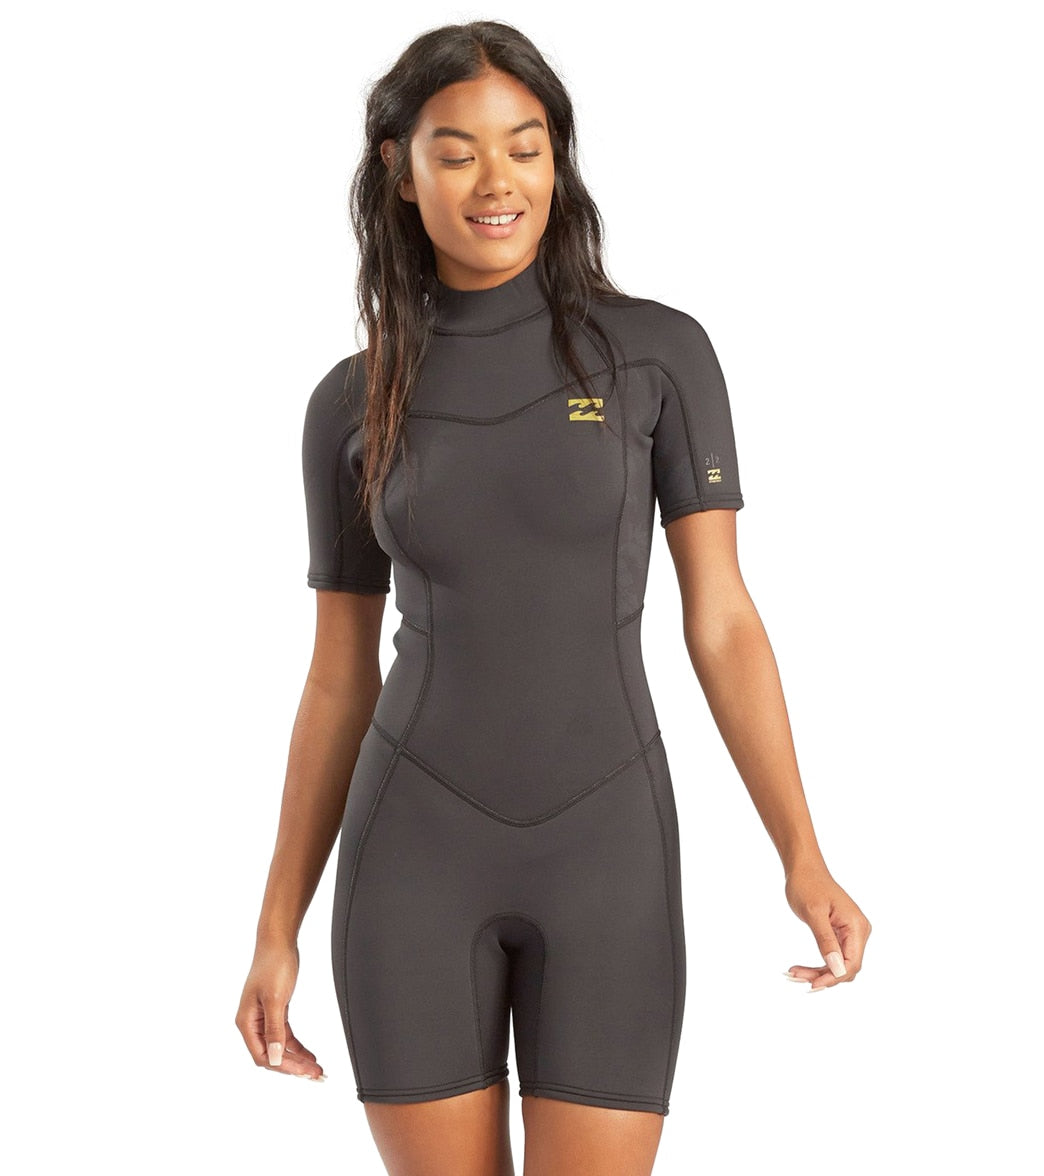 Billabong Women's 22Mm Synergy Back Zip Spring Suit at SwimOutlet.com